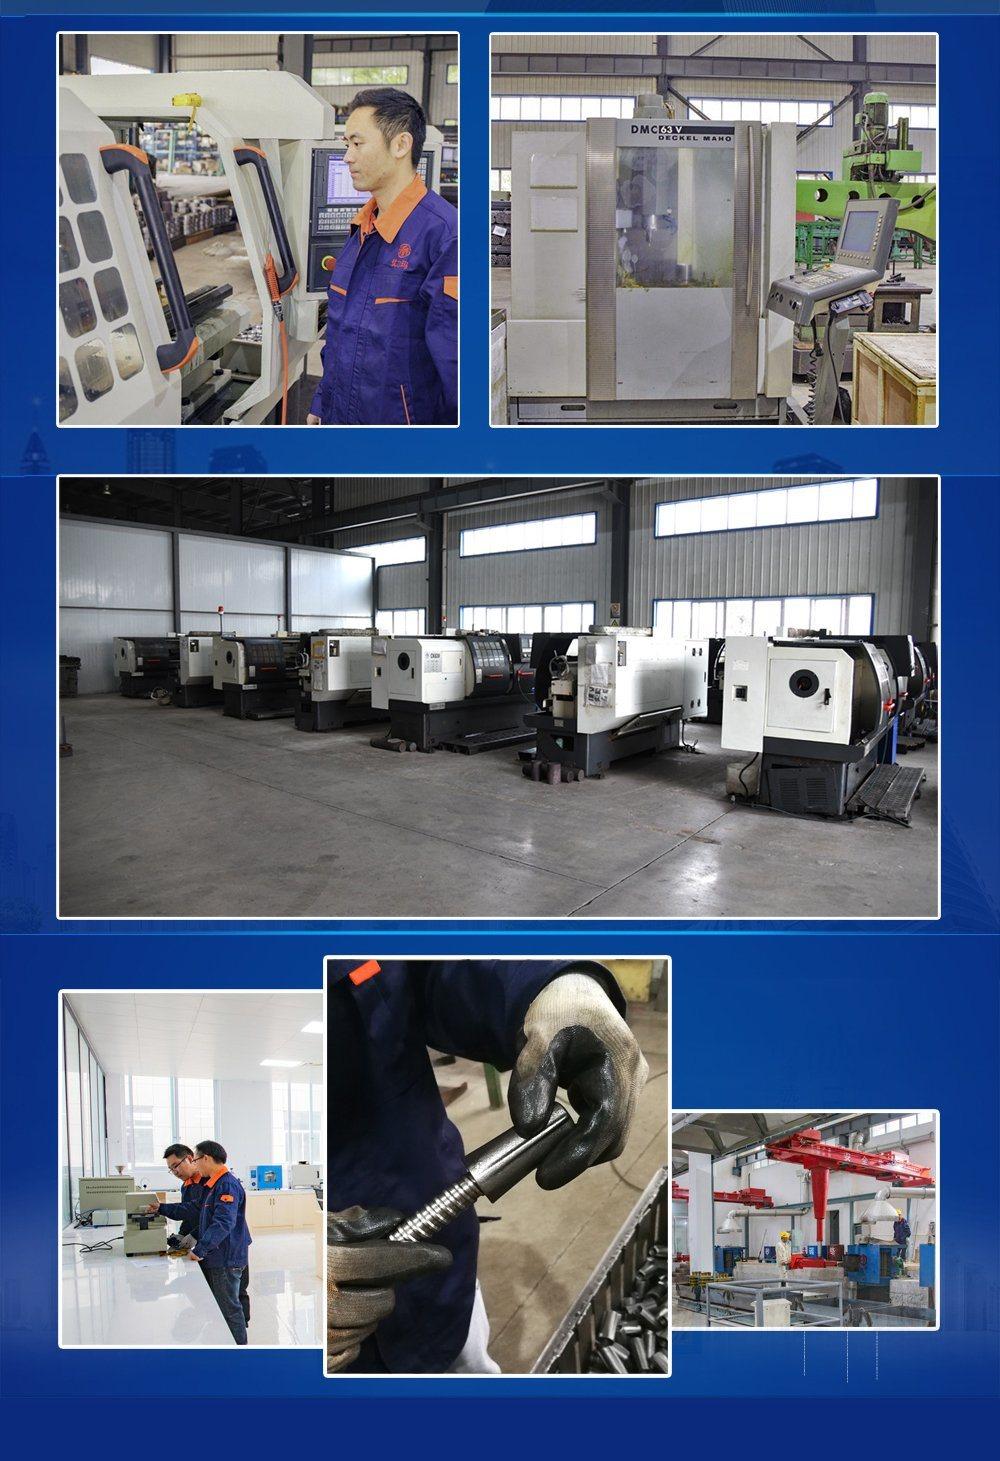 Casting, Machinery, Equipment, Accessories, Mating Facility, Construction, Nuts, Pre-Tensioning, Forging, Compressing, Component, Decoration, Lighting, Bus